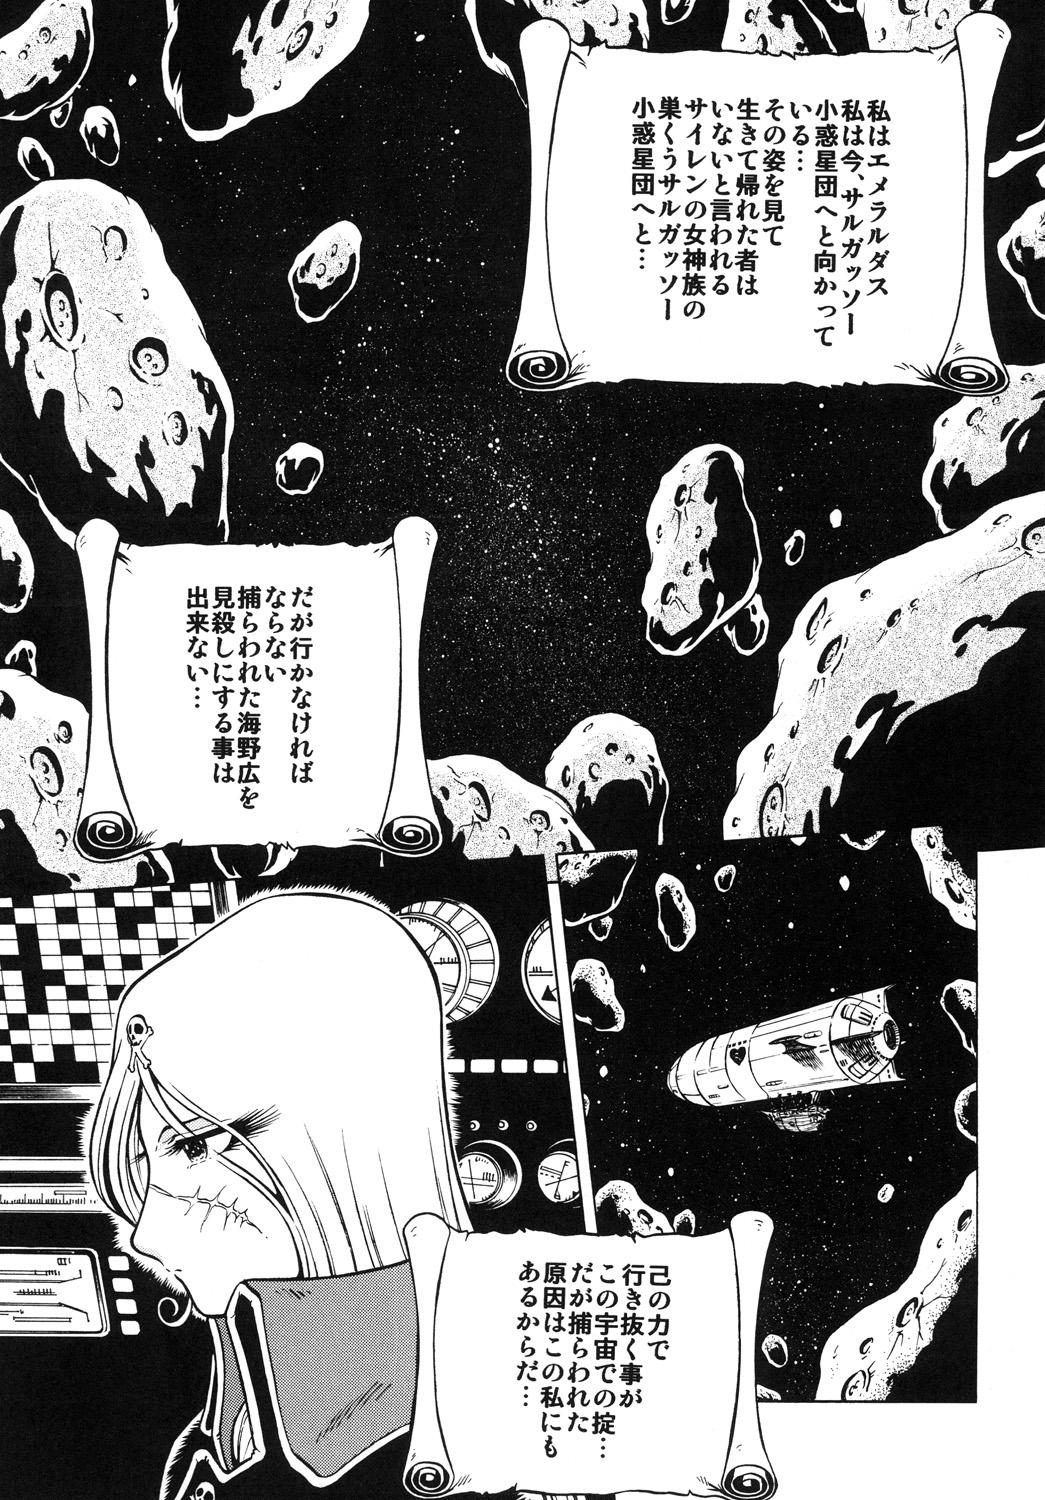 Best Blowjob NightHead+2 - Space pirate captain harlock Francaise - Page 4